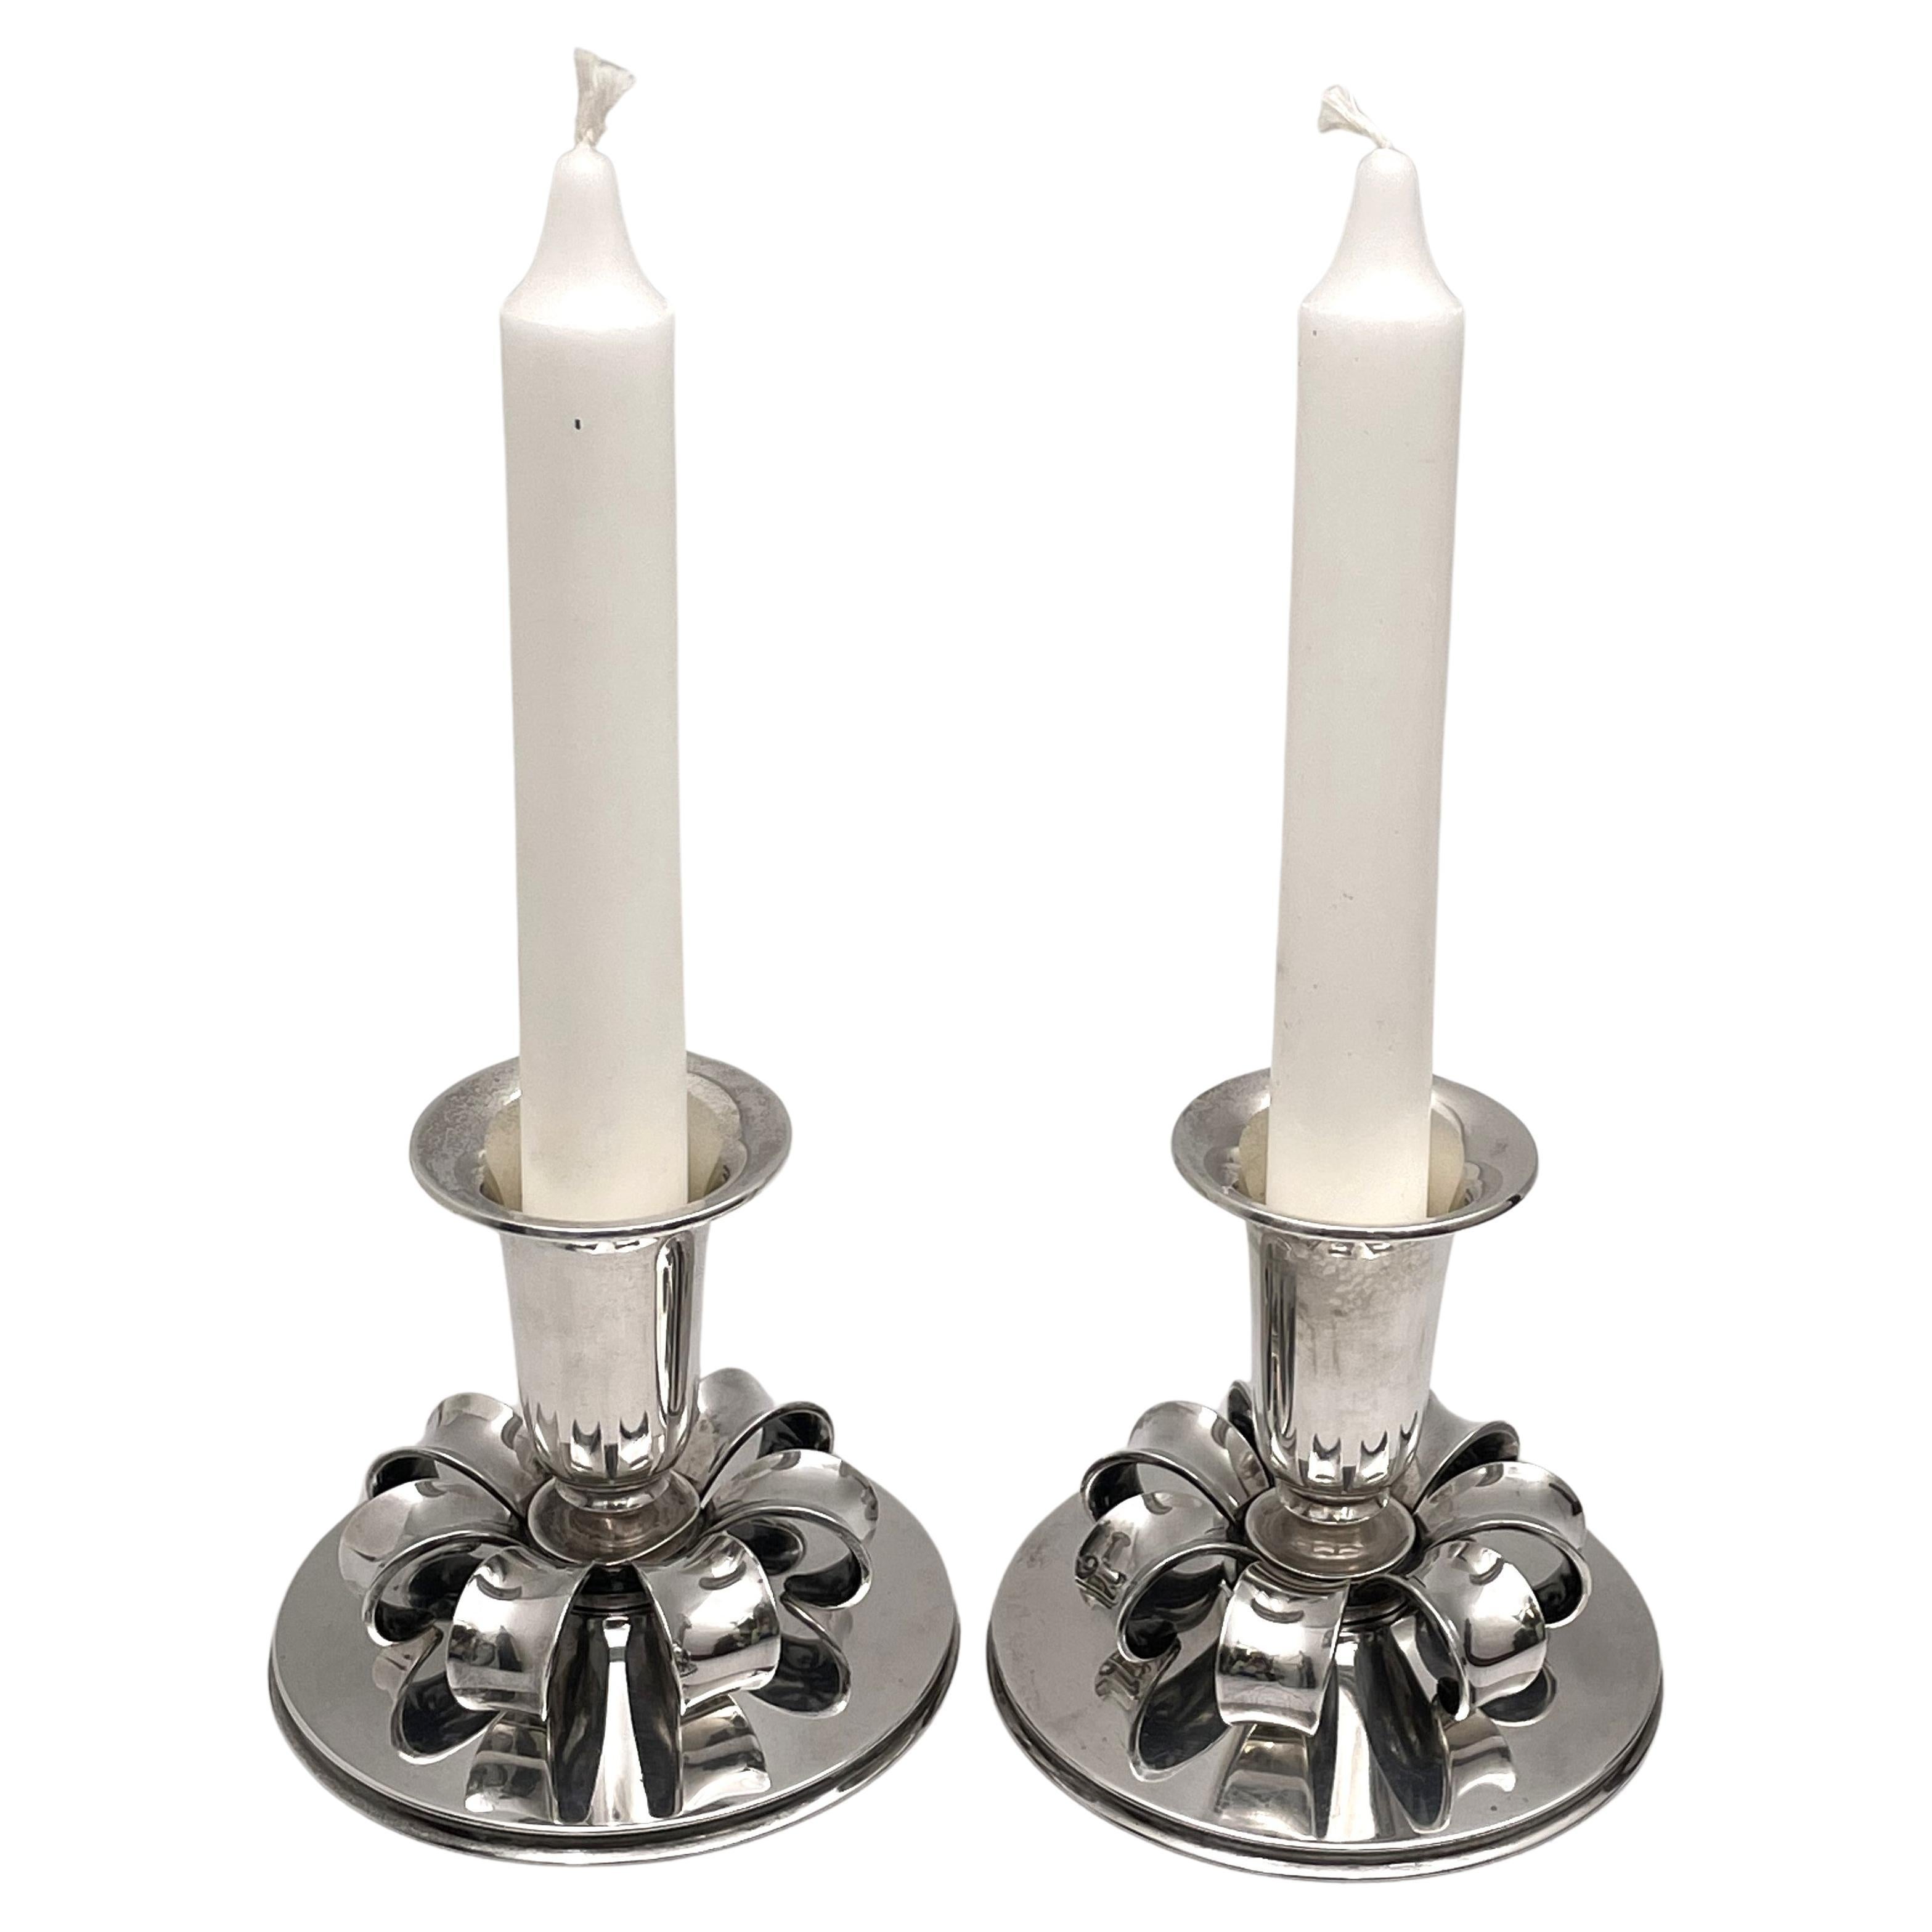 Cohr Sterling Silver Pair of Oil Candlesticks in Jensen Mid-Century Modern Style For Sale